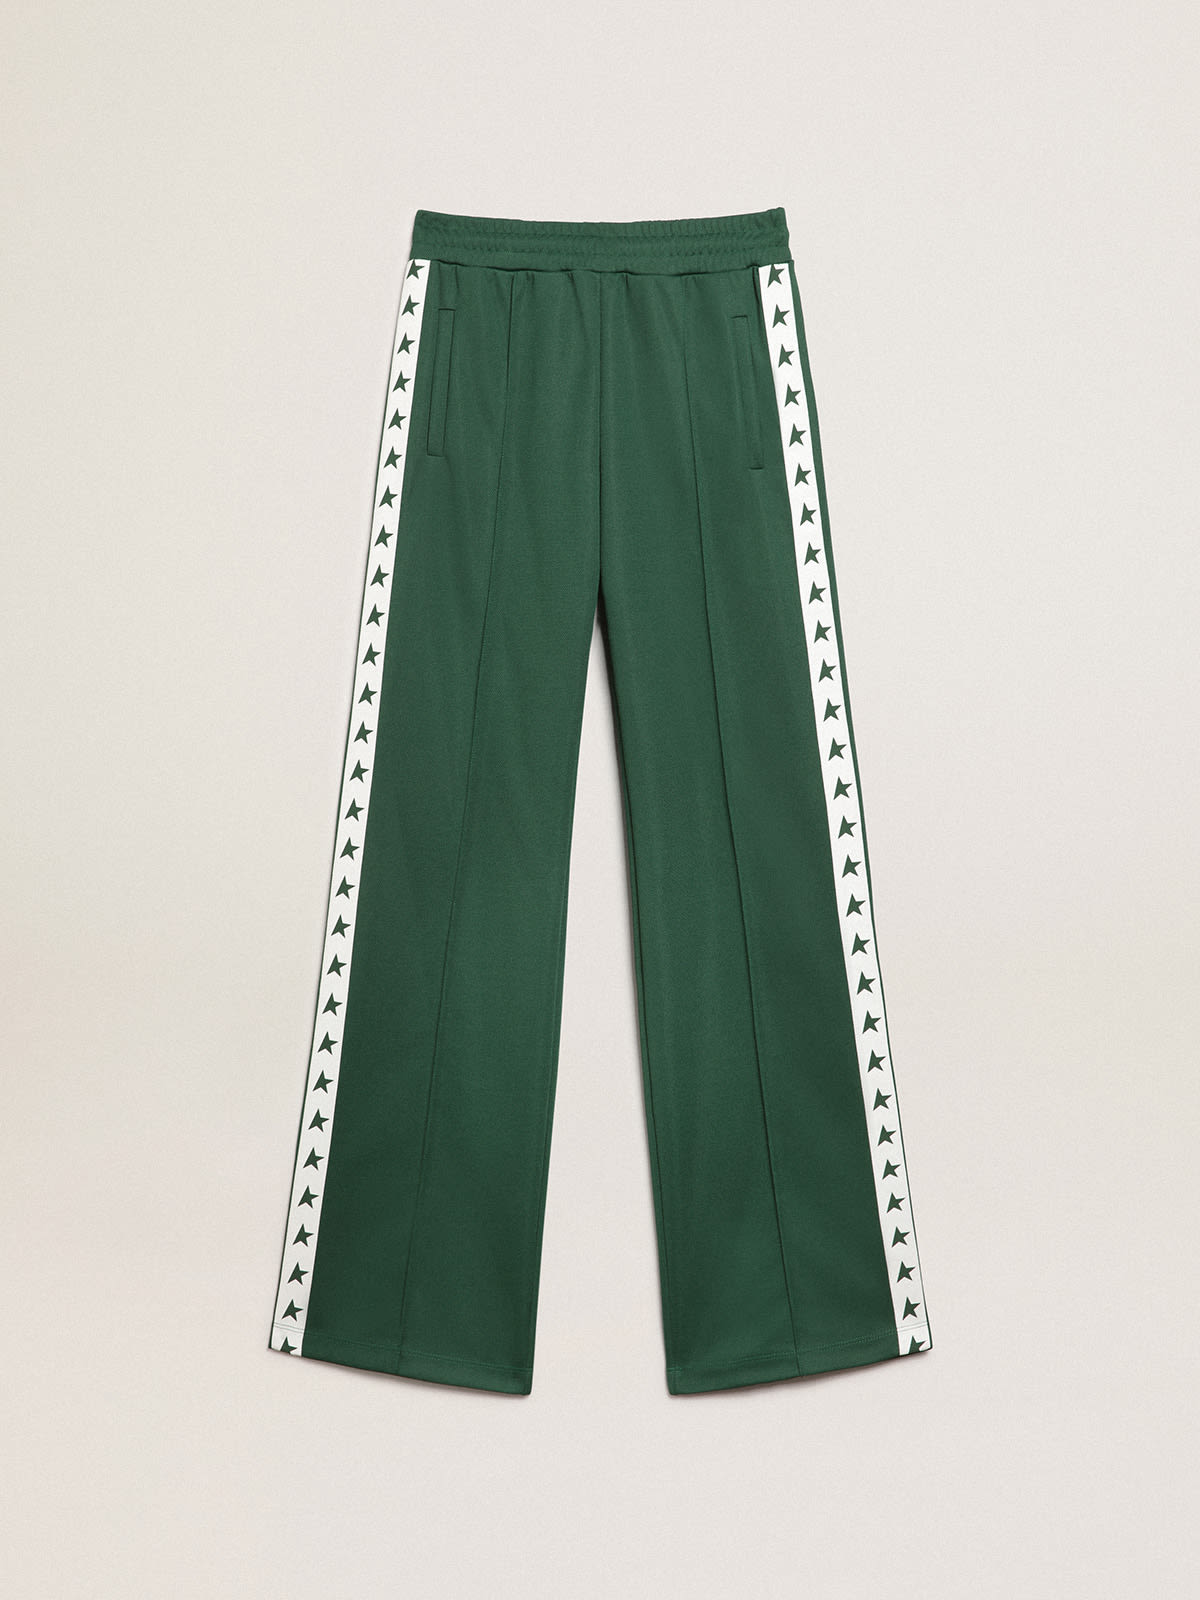 Golden Goose - Women's bright green joggers with band and stars in 